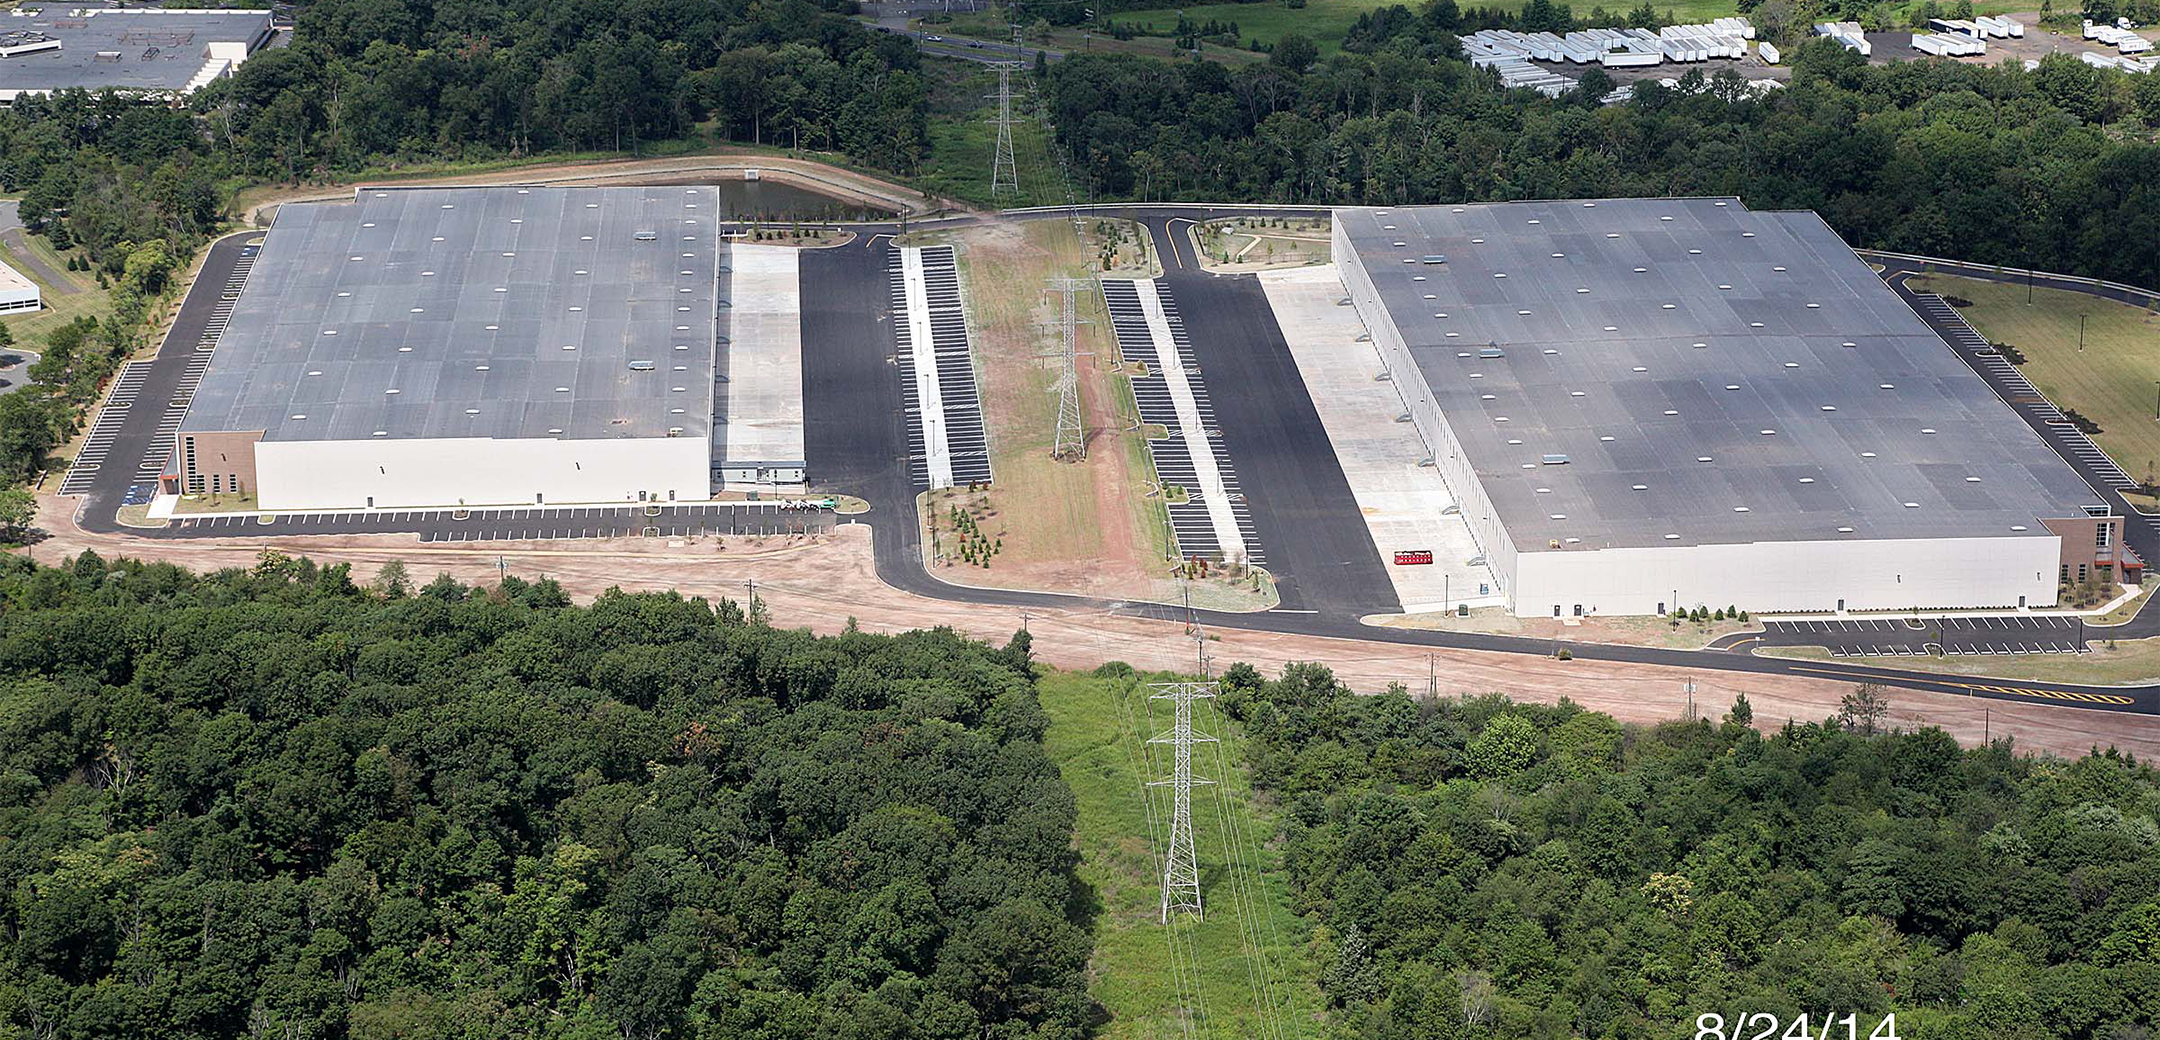 An aerial view of the South Washington Park buildings showcasing the two warehouses, parking lots, overall layout power lines going down the center and a green forest in the foreground.